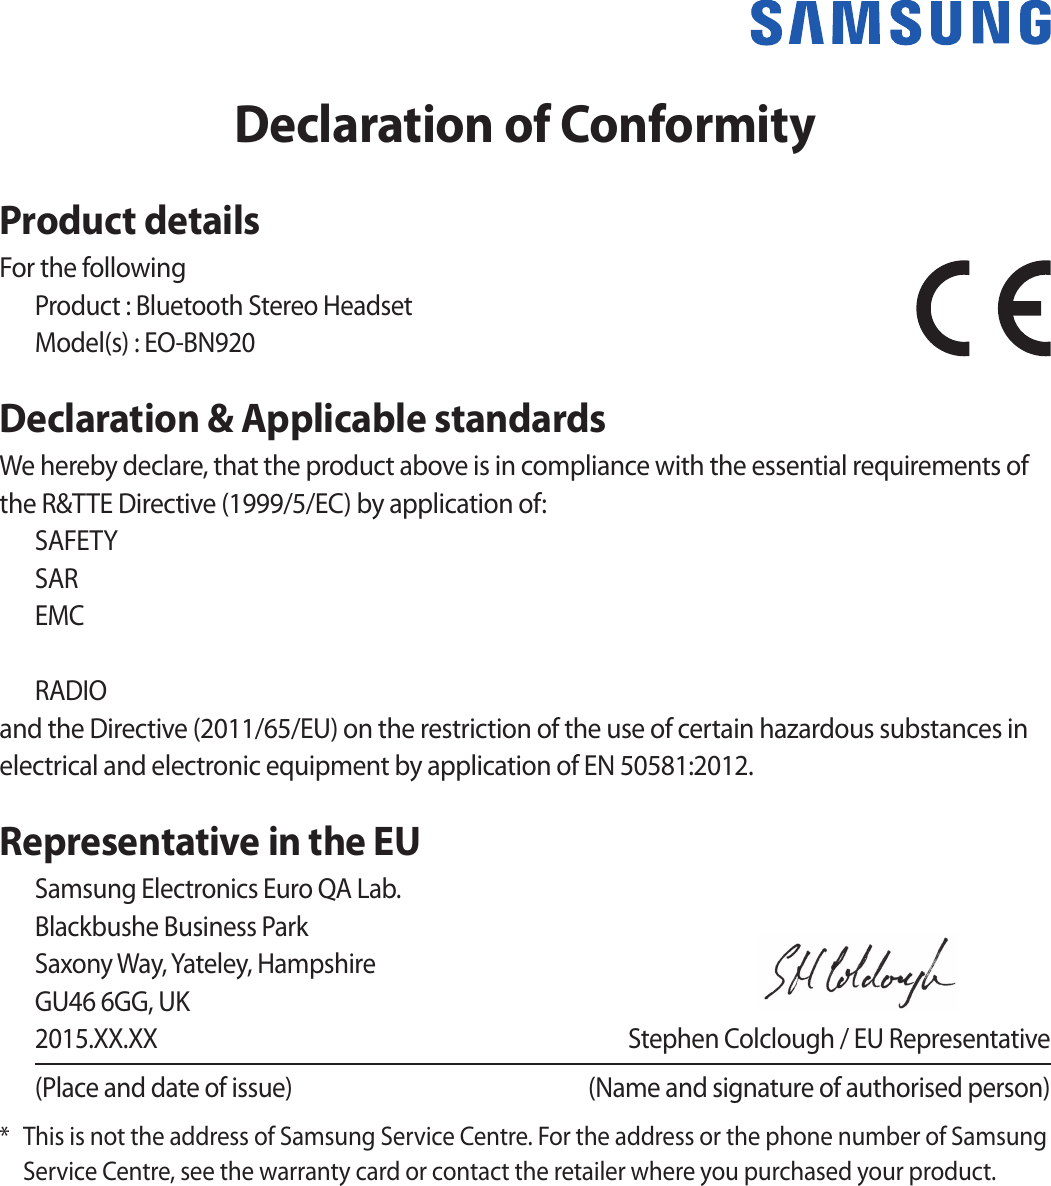 Declaration of ConformityProduct detailsFor the followingProduct : Bluetooth Stereo HeadsetModel(s) : EO-BN920Declaration &amp; Applicable standardsWe hereby declare, that the product above is in compliance with the essential requirements of the R&amp;TTE Directive (1999/5/EC) by application of:SAFETY SAR EMC    RADIO and the Directive (2011/65/EU) on the restriction of the use of certain hazardous substances in electrical and electronic equipment by application of EN 50581:2012.Representative in the EUSamsung Electronics Euro QA Lab. Blackbushe Business Park Saxony Way, Yateley, Hampshire GU46 6GG, UK2015.XX.XX  Stephen Colclough / EU Representative(Place and date of issue)  (Name and signature of authorised person)*  This is not the address of Samsung Service Centre. For the address or the phone number of Samsung Service Centre, see the warranty card or contact the retailer where you purchased your product.